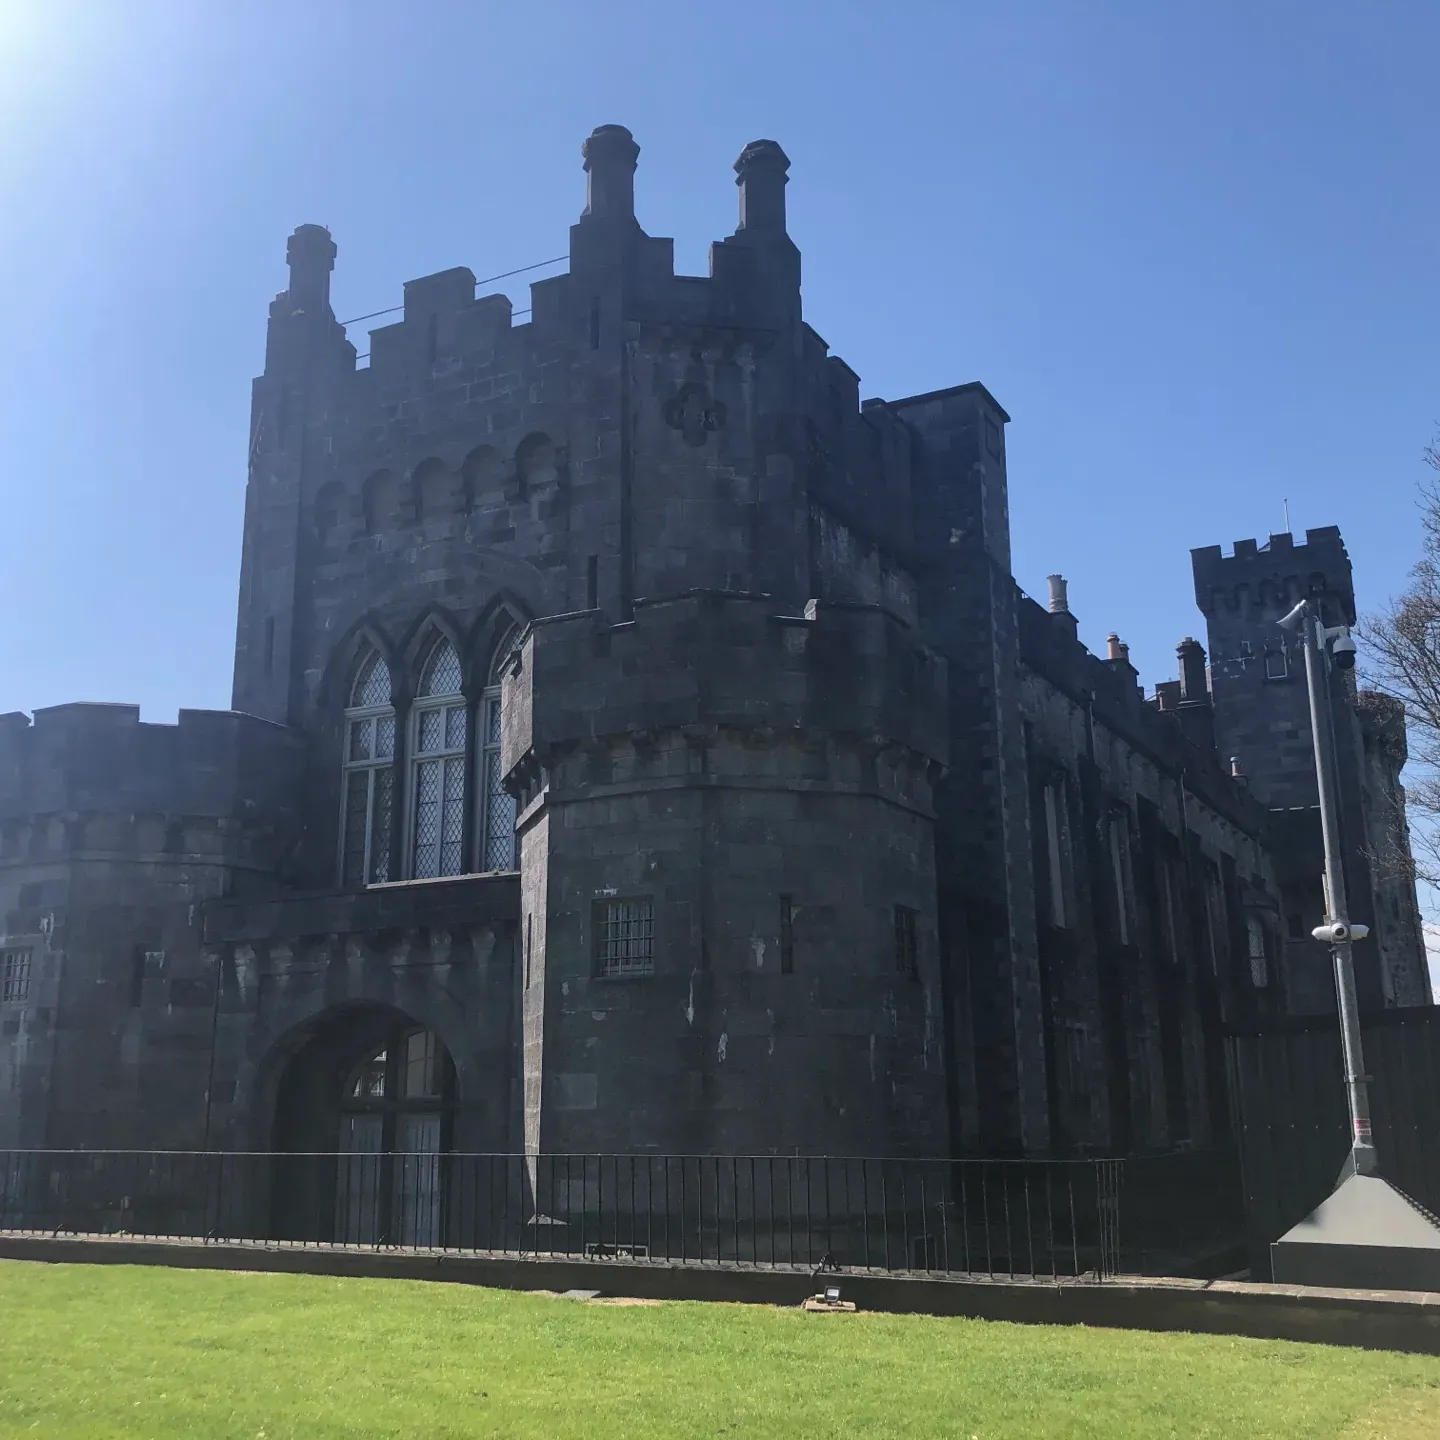 From a trip to Ireland. I got to see real castles!